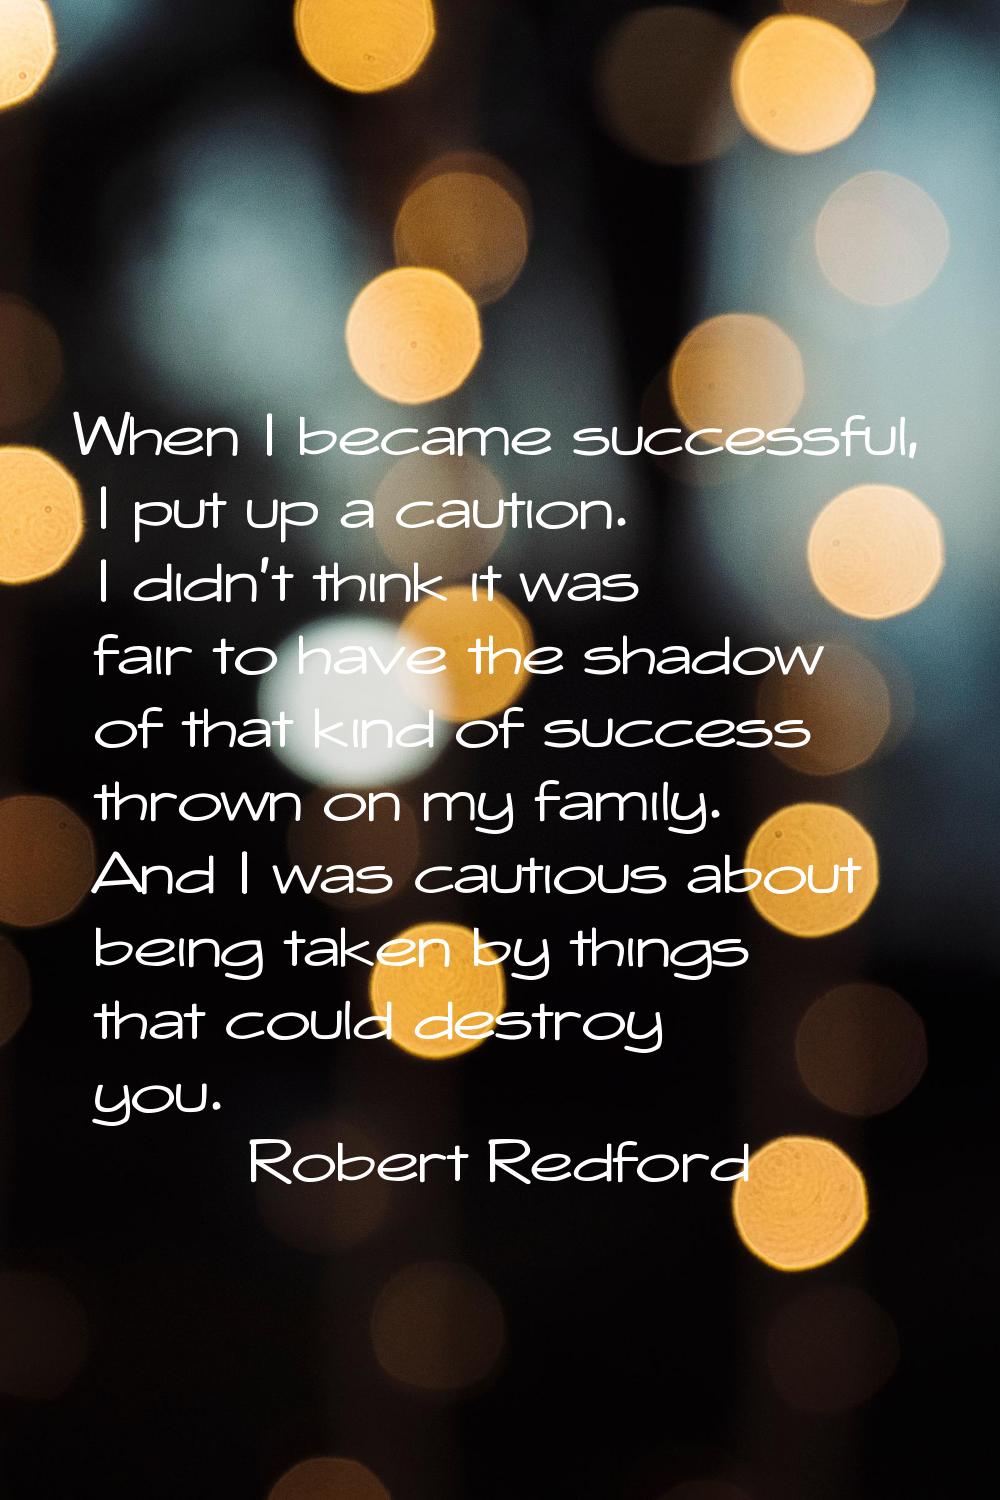 When I became successful, I put up a caution. I didn't think it was fair to have the shadow of that